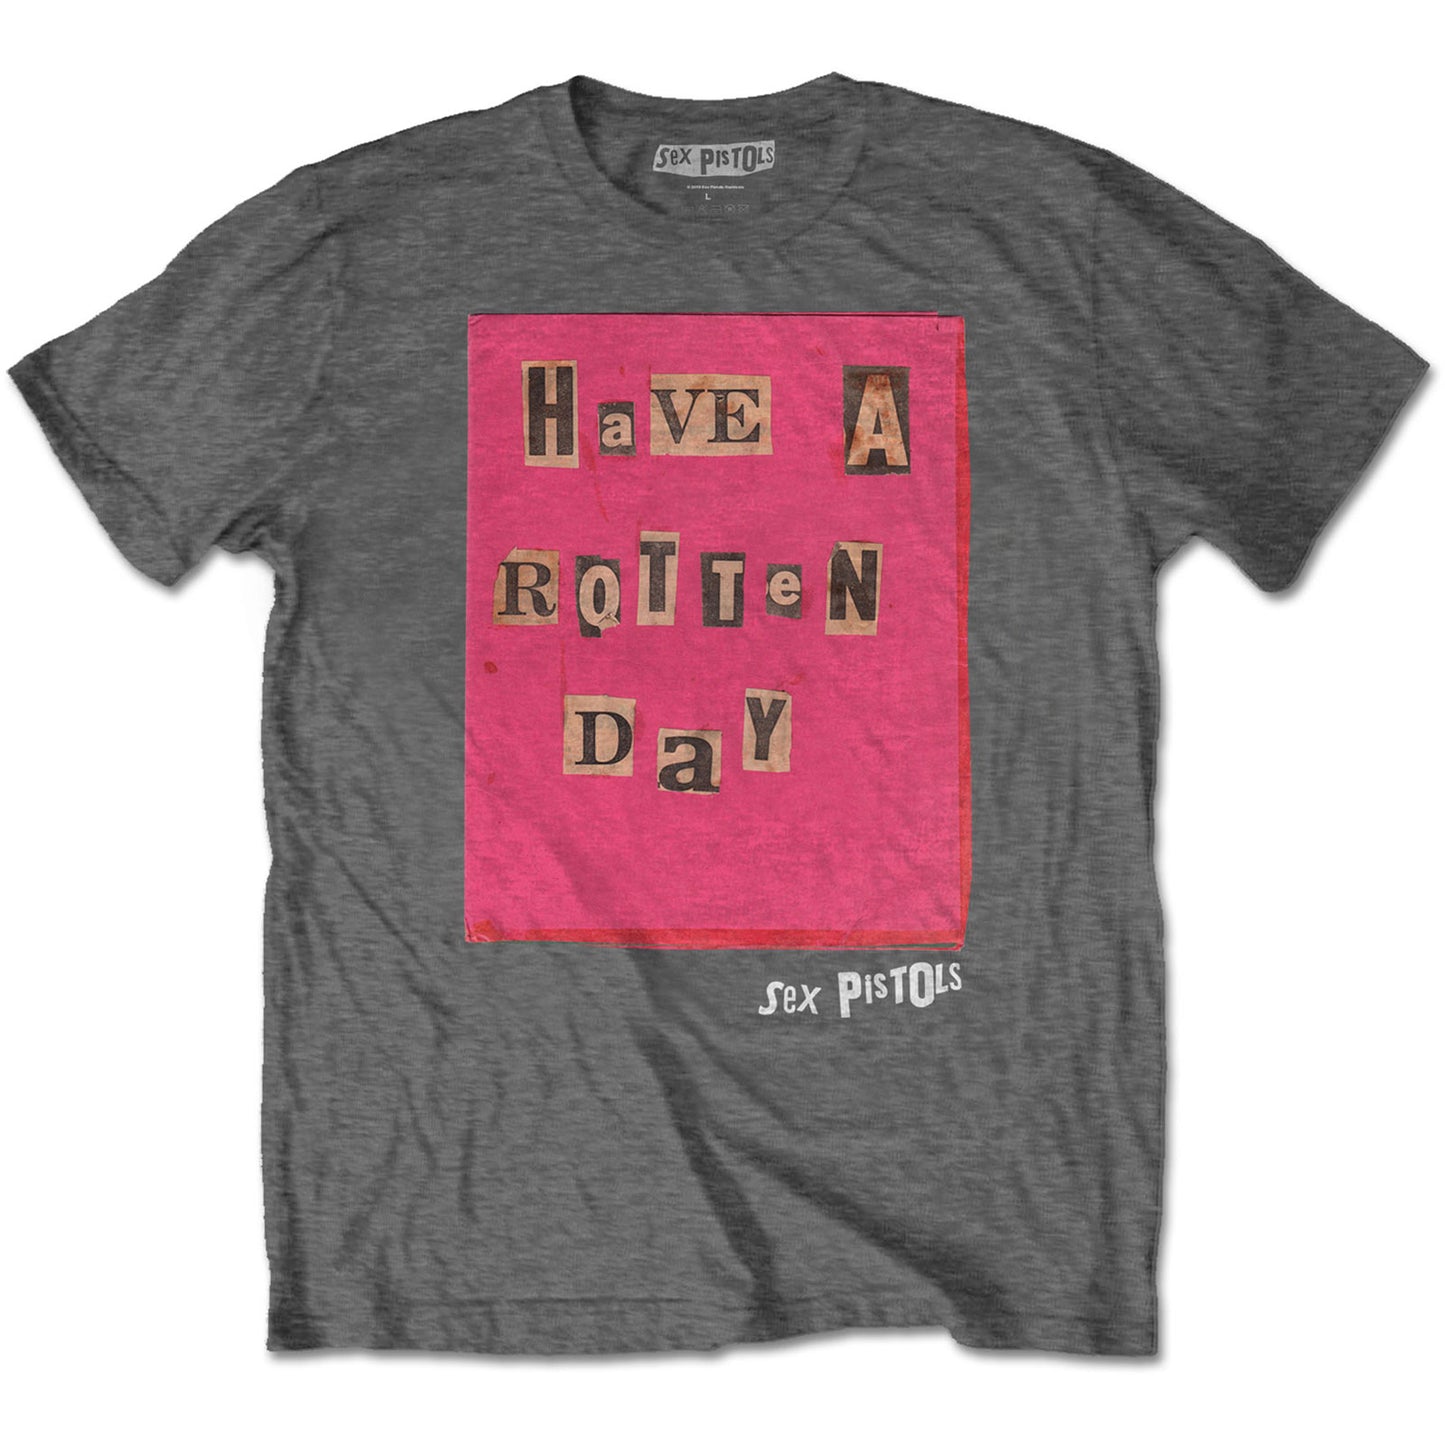 The Sex Pistols T-Shirt: Rotten Day